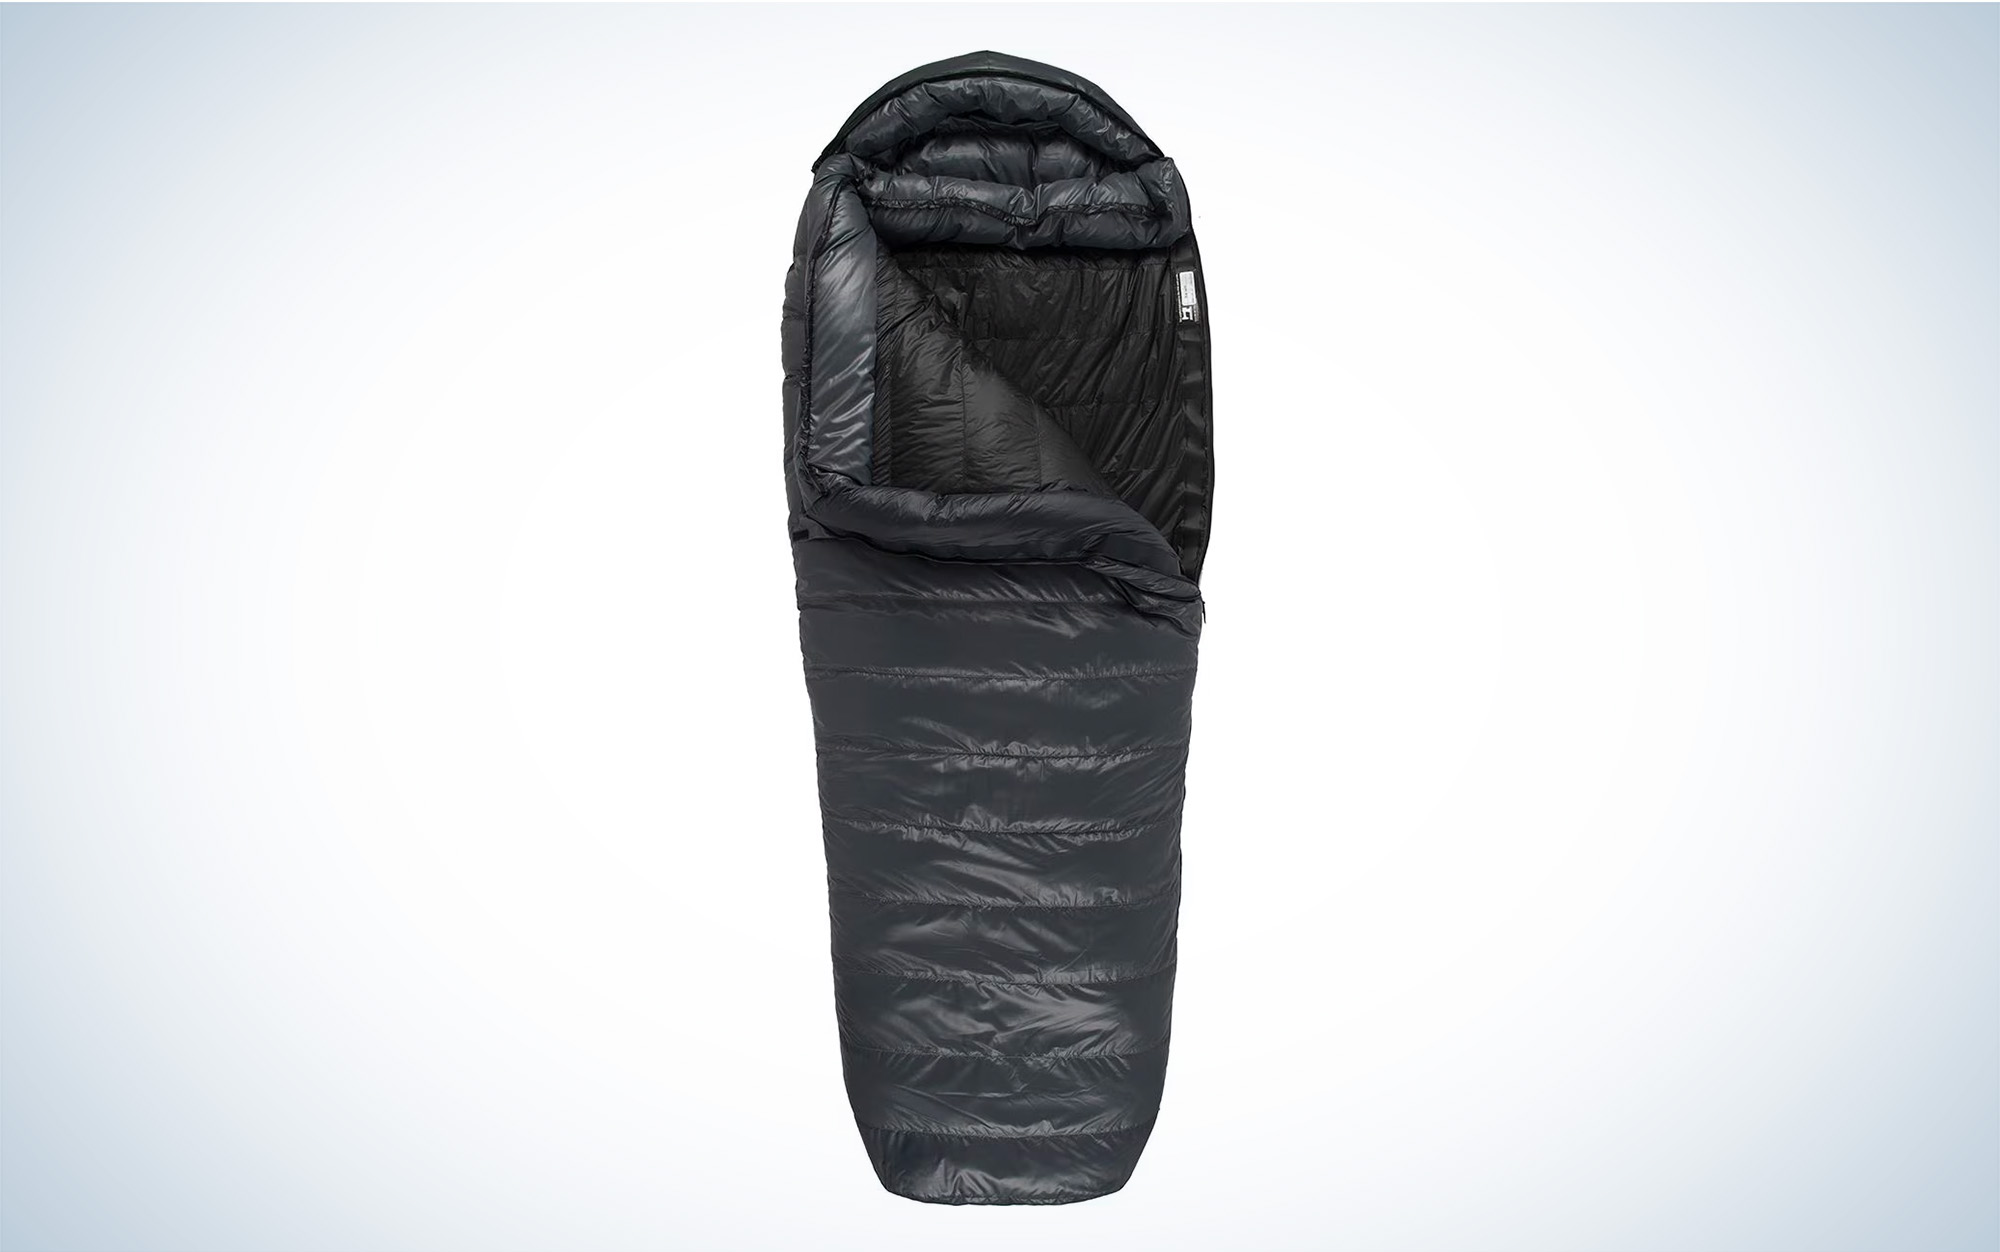 Western Mountaineering Sequoia MF 5F is one of the best cold weather sleeping bags.